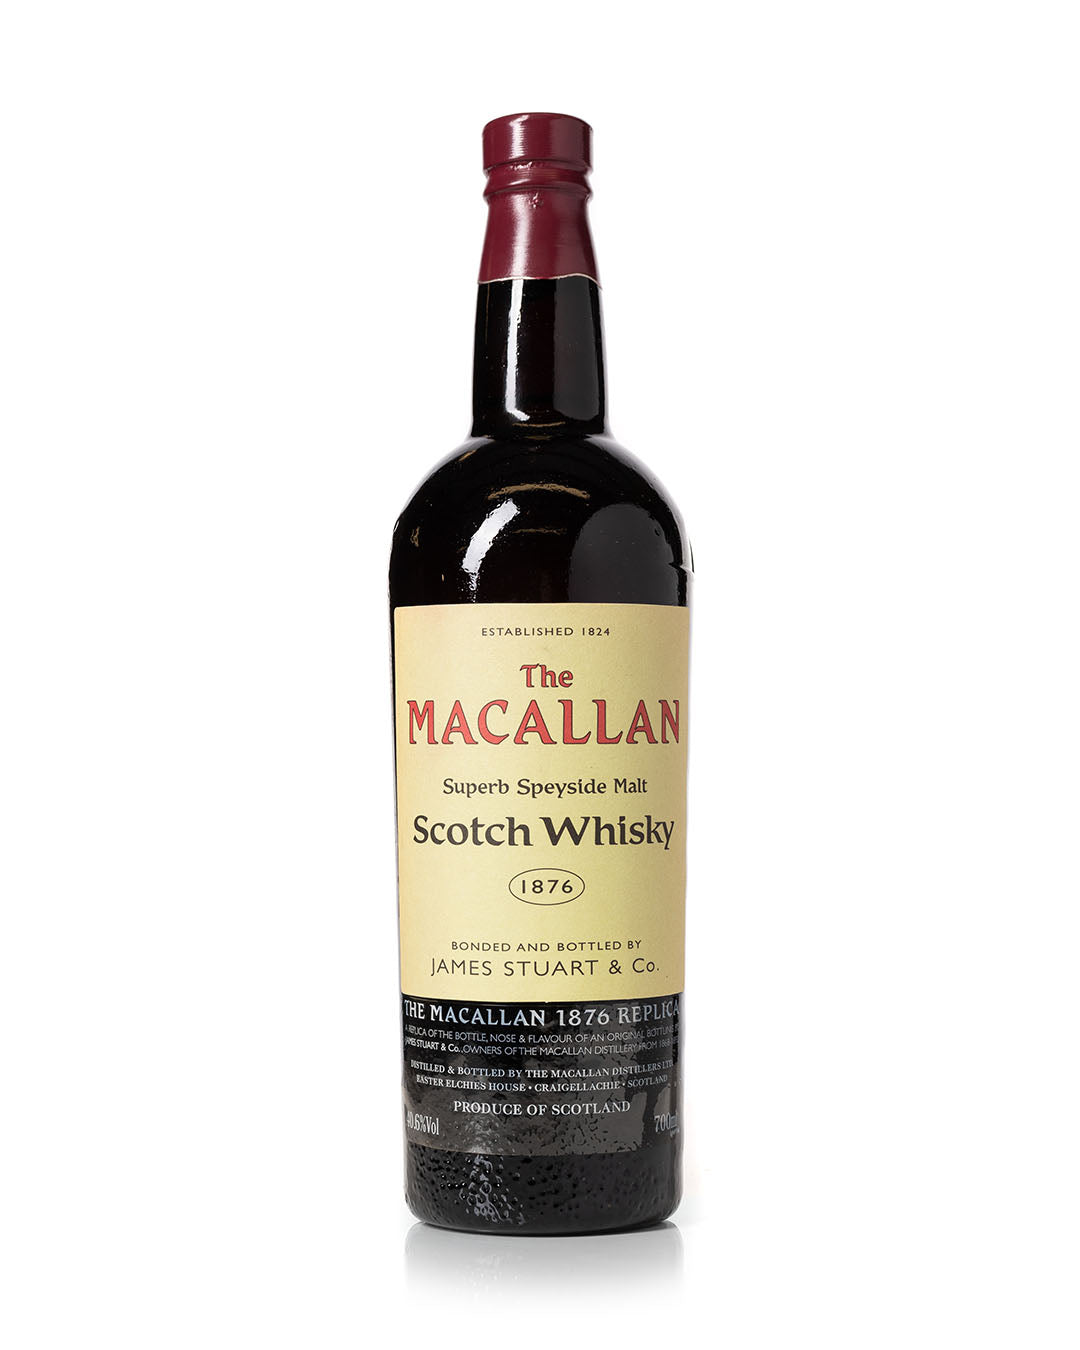 Macallan Replica Full Series Collection: 1841, 1851, 1861, 1874 and 1876